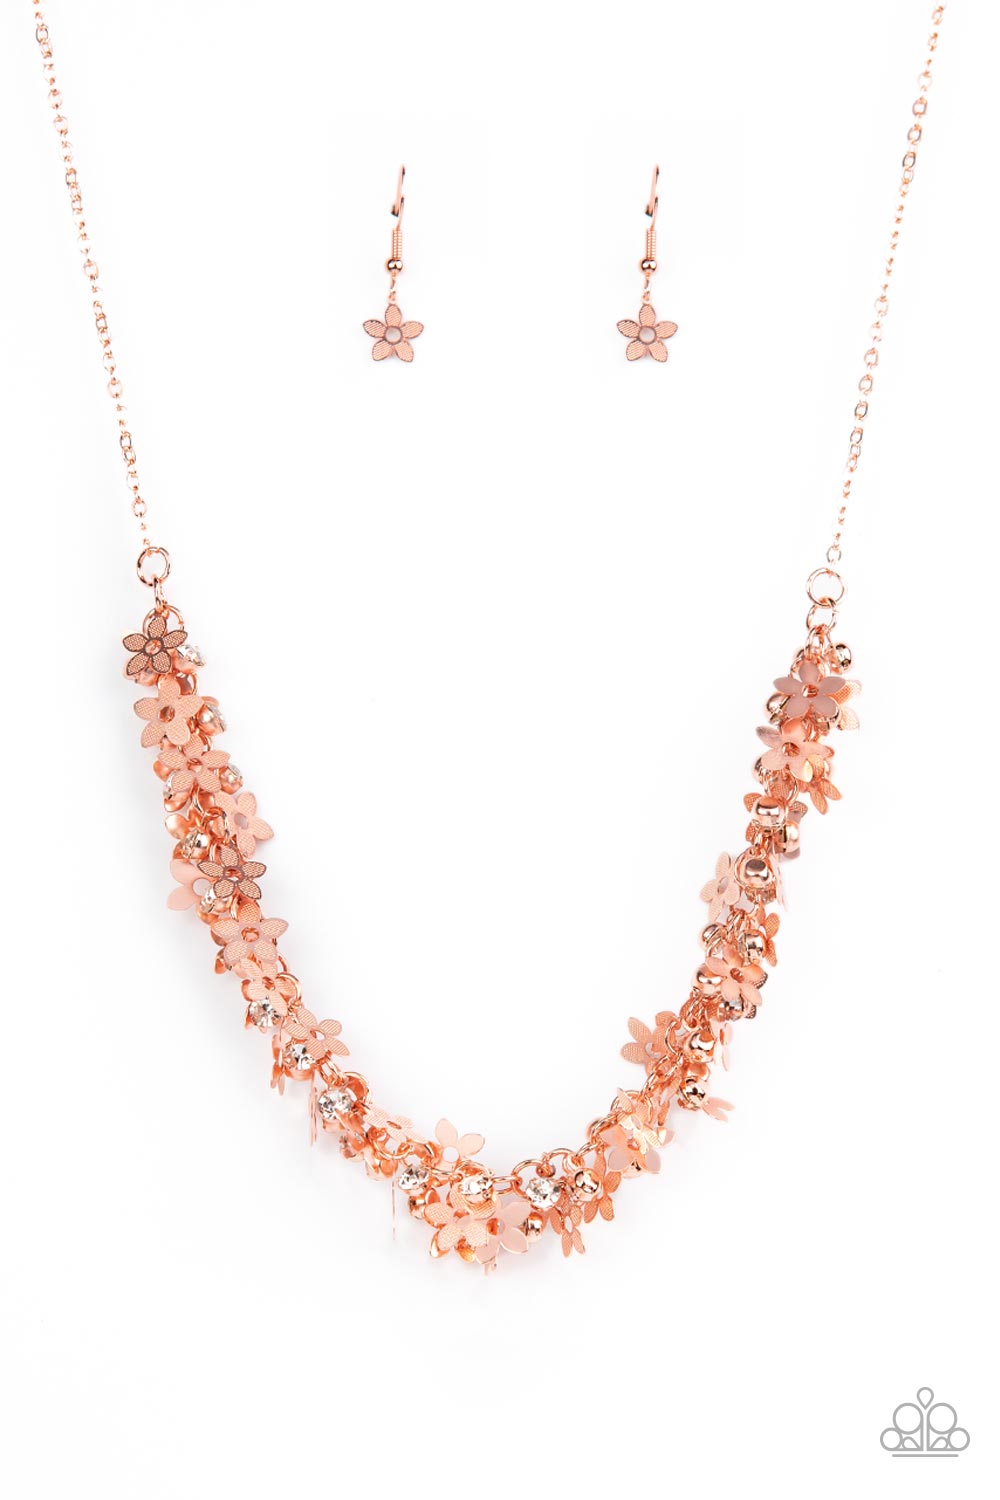 Fearlessly Floral - Copper necklace B128